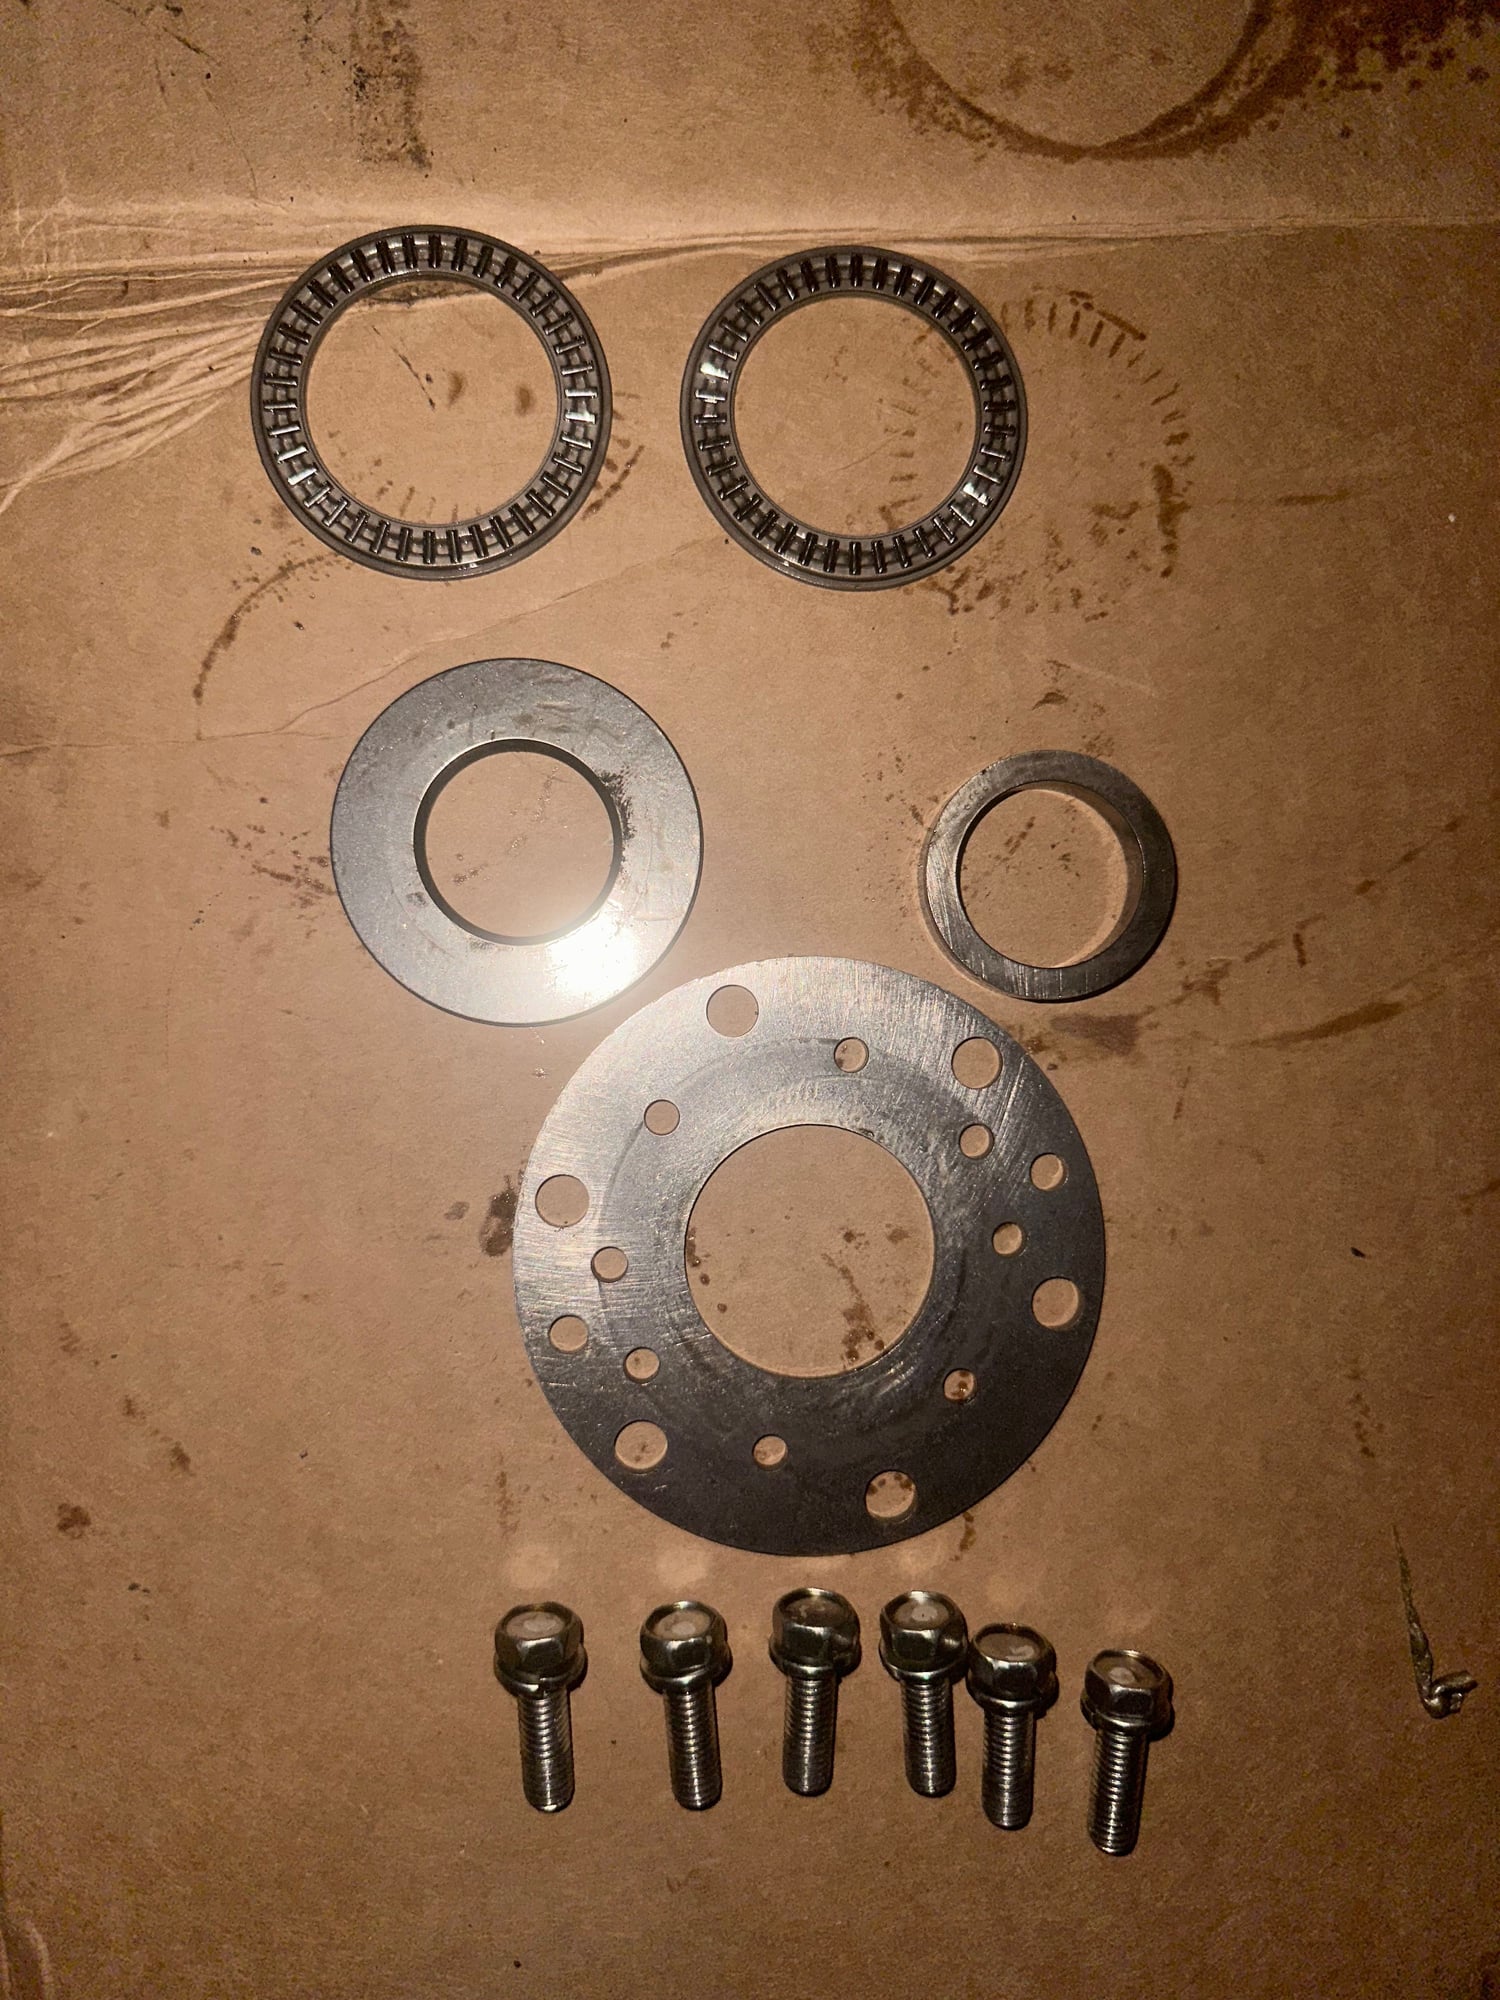 1994 Mazda RX-7 - Front Thrust Bearing, Spacer, Rear Thrust Bearing, Thermal Pellet and Spring - Engine - Internals - $80 - Palmdale, CA 93551, United States